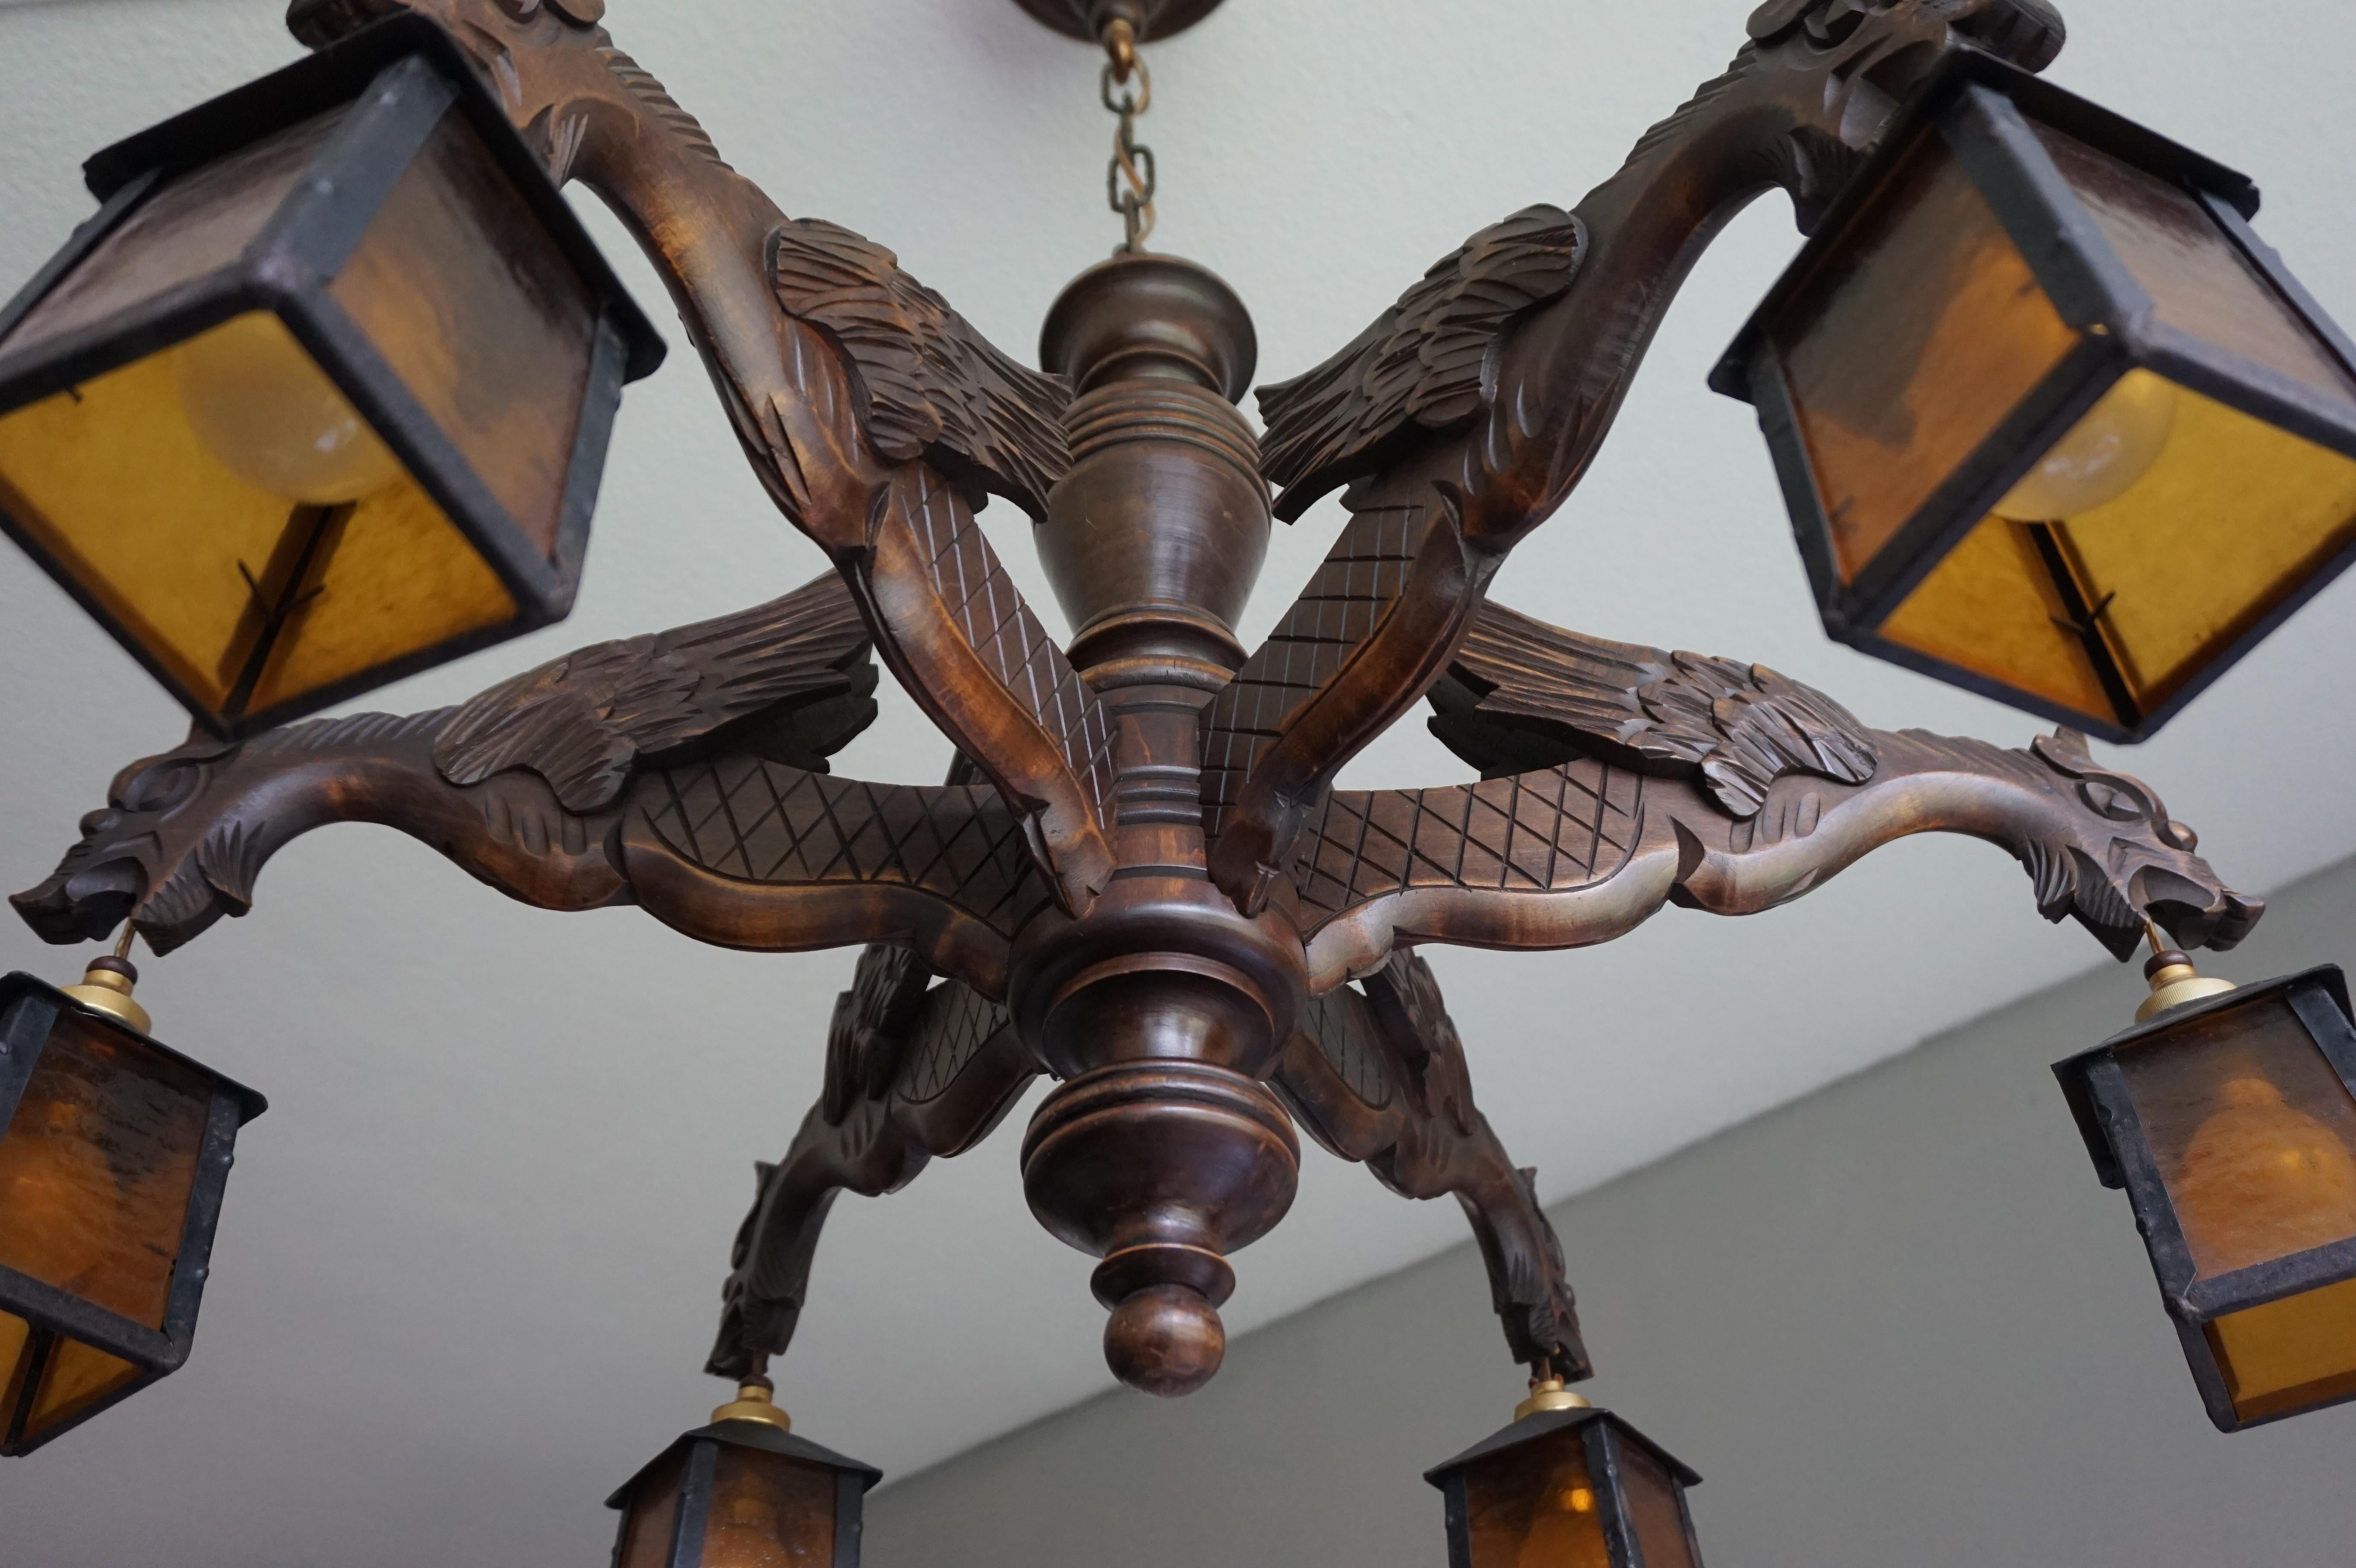 Hand Carved Chandelier in Medieval Gothic Style, Six Dragons Holding Lanterns 1